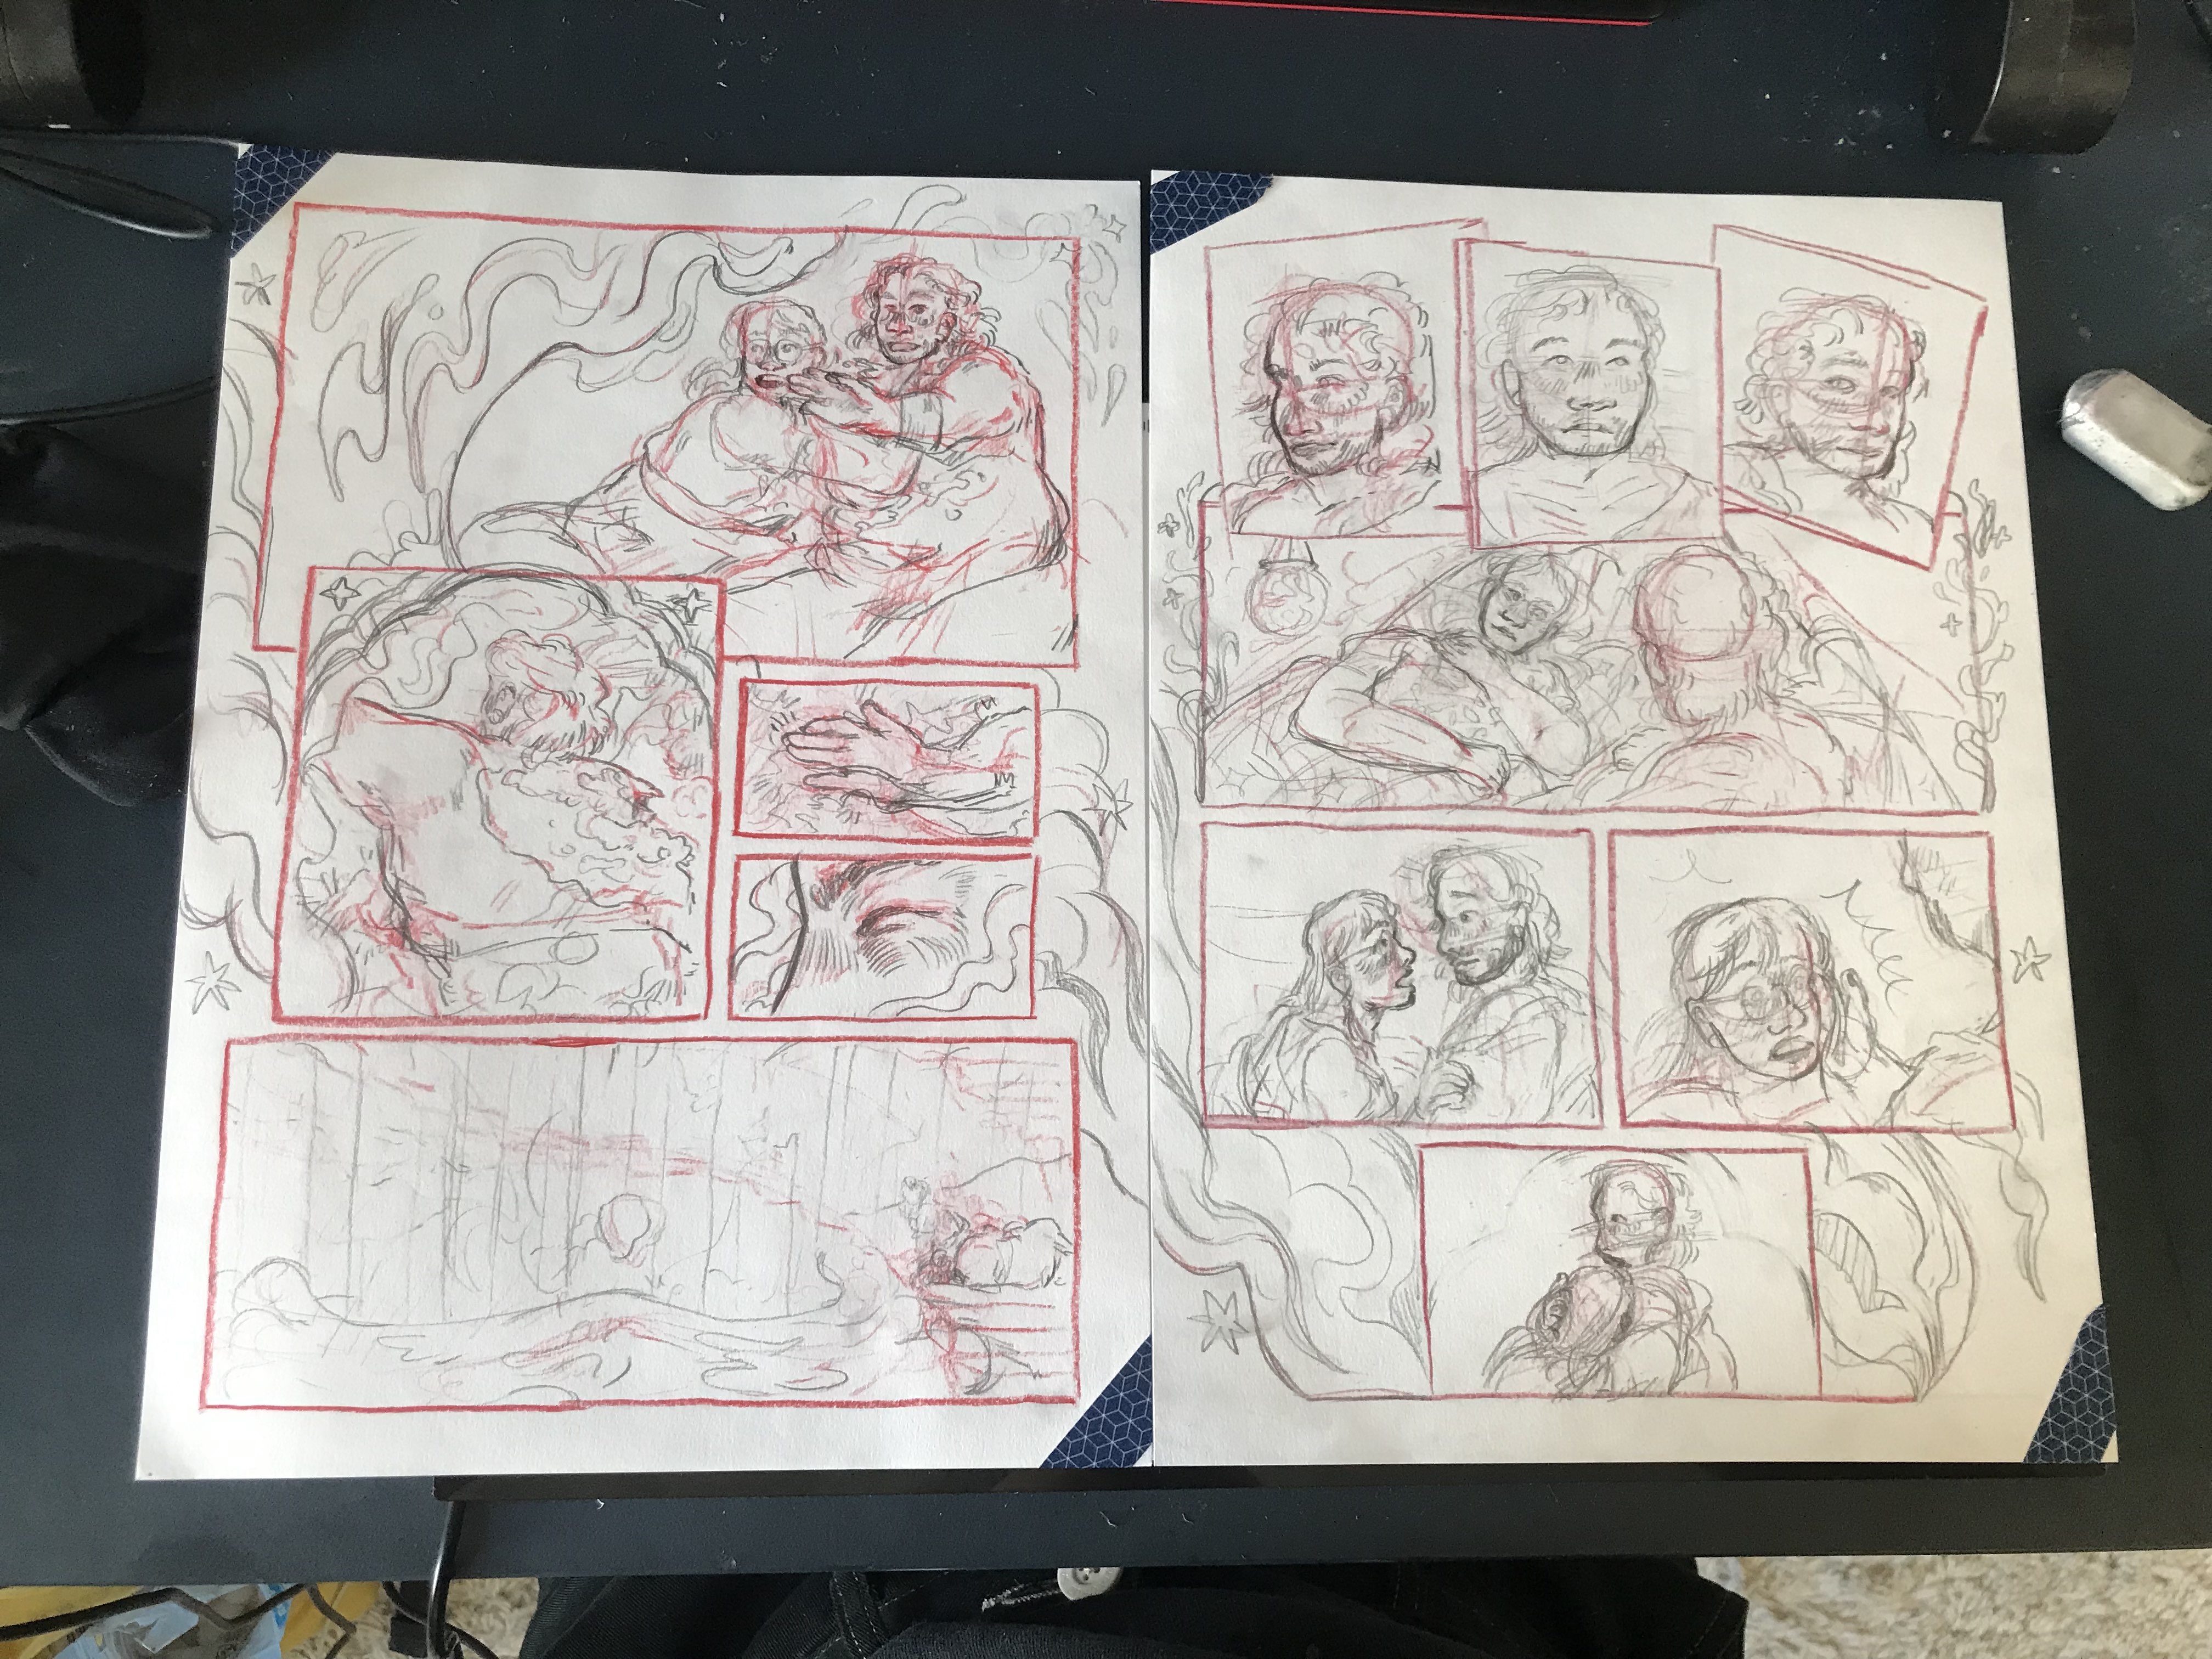 Two comic pages, with panel borders, compositions and anatomy drawn in red pencil, with more detailed sketches in lead over the top.